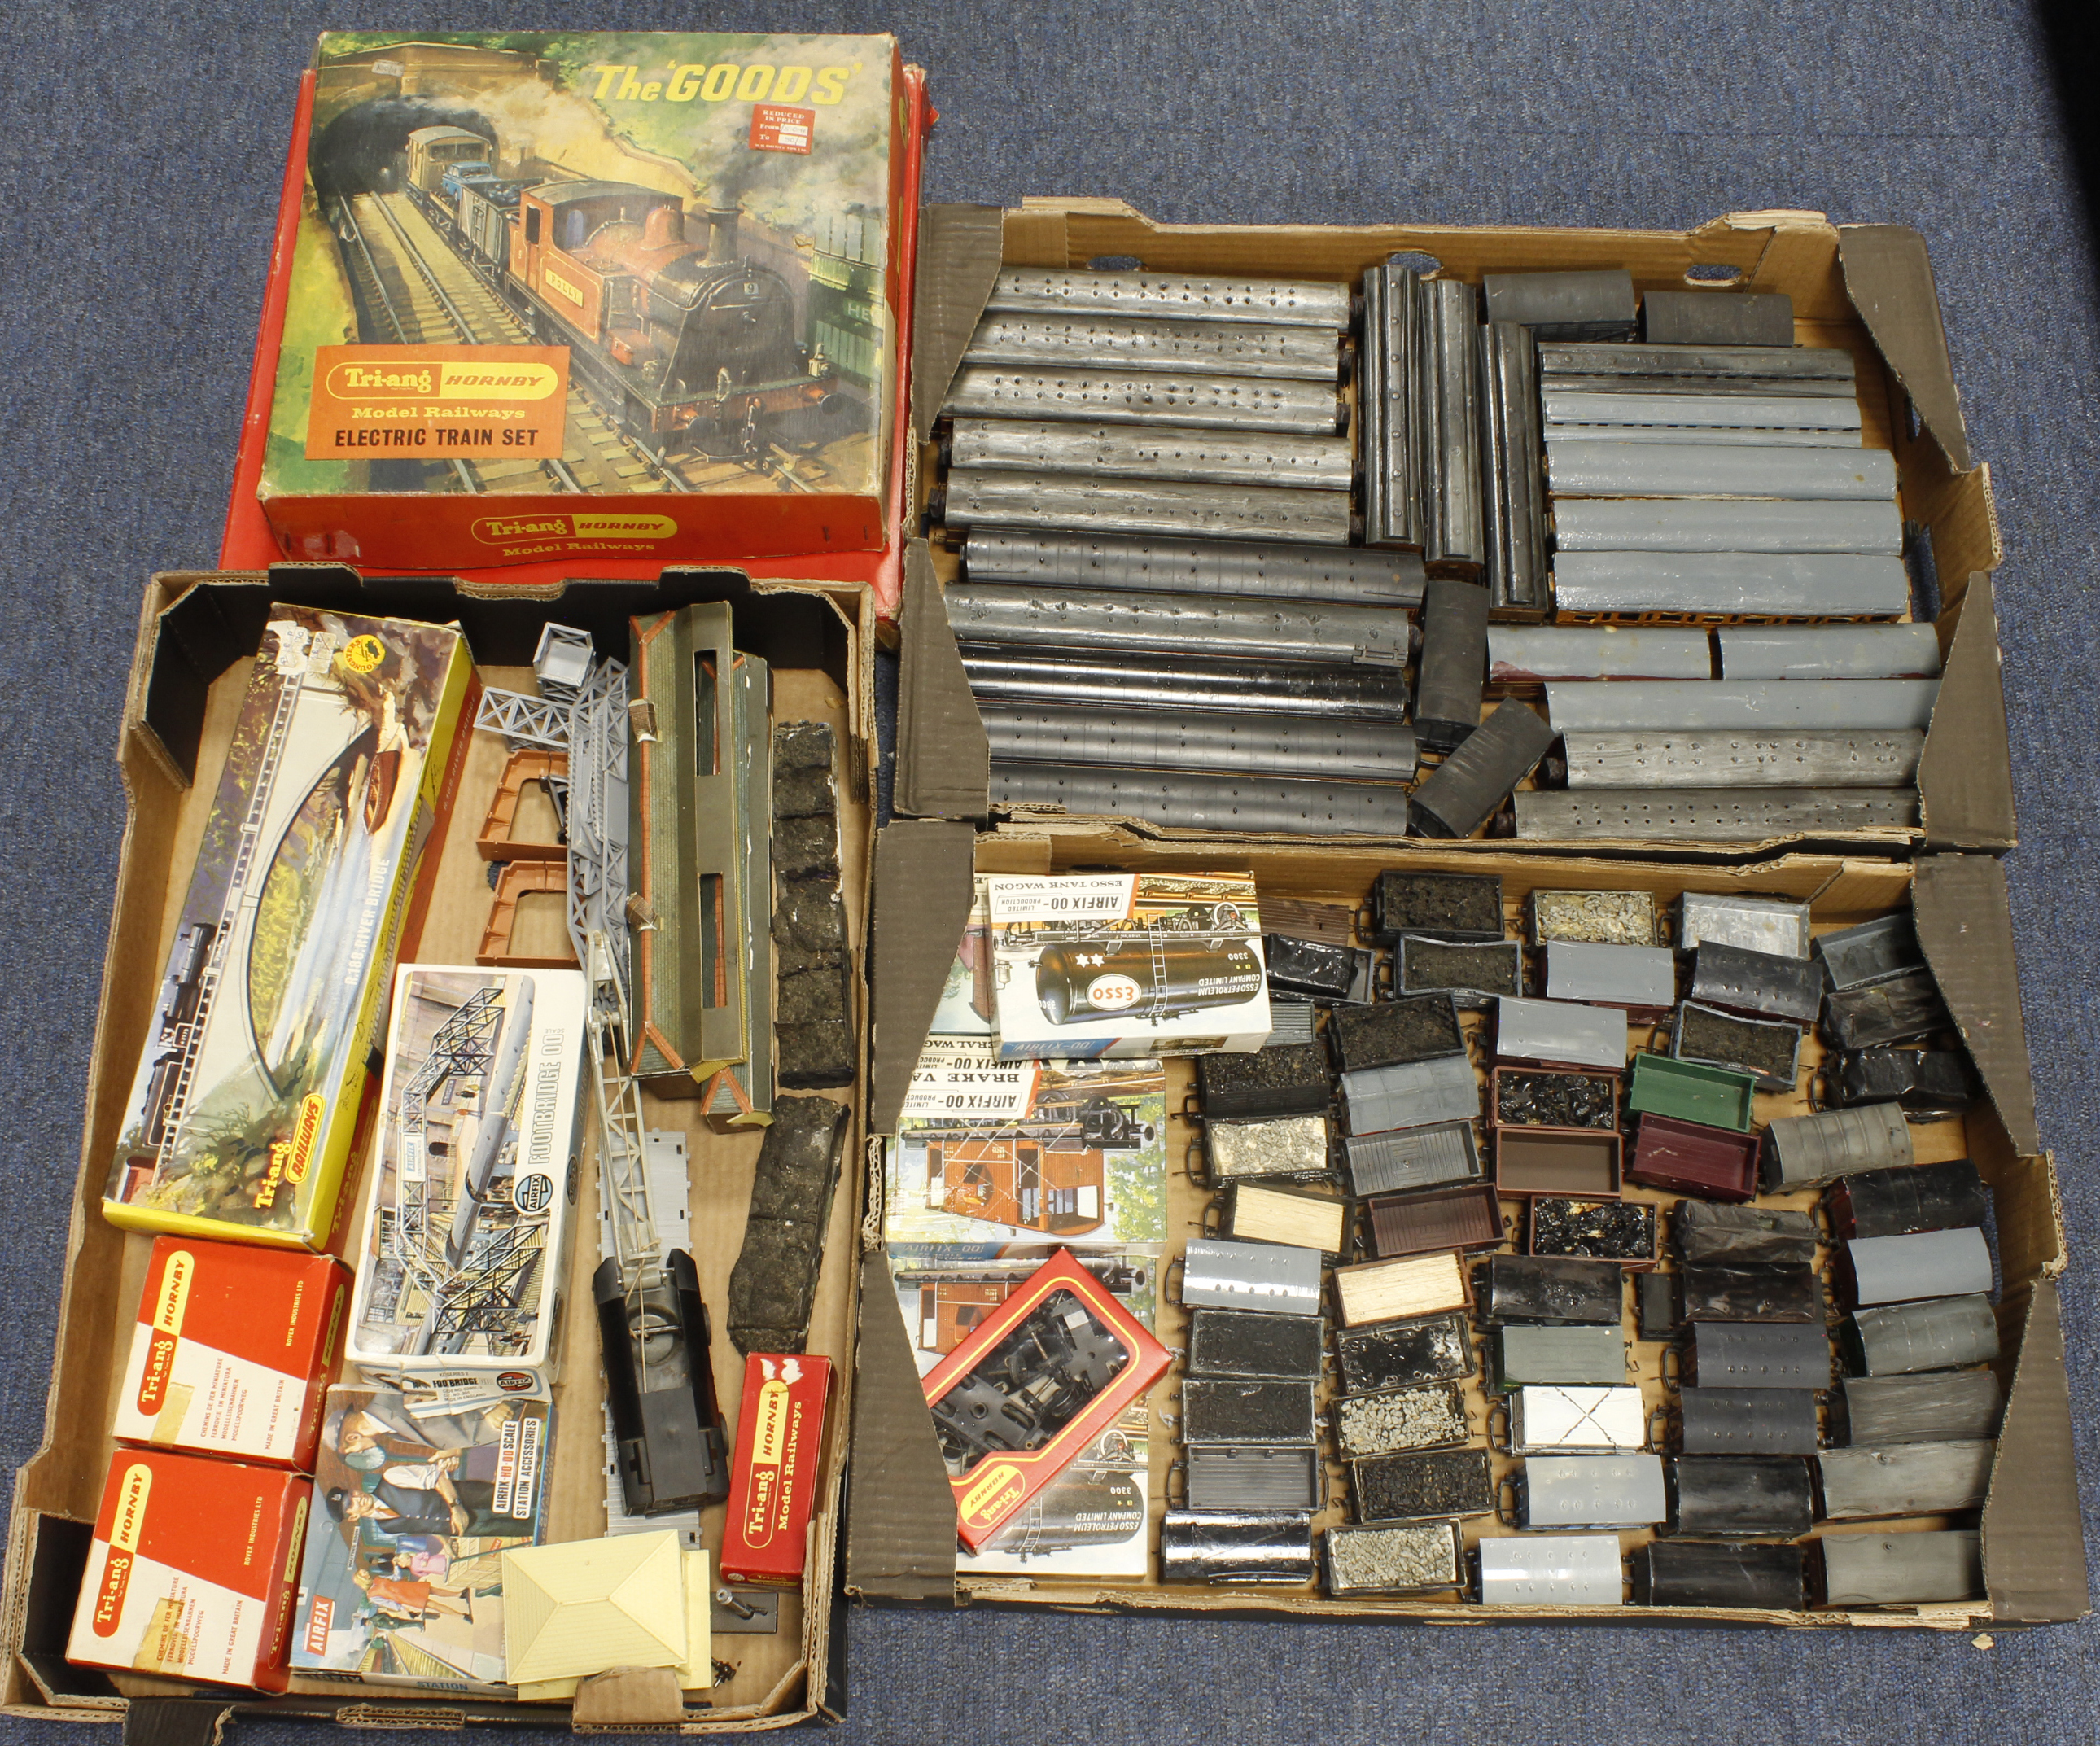 Model Railway. A collection of various OO gauge model railway, including two boxed Triang sets (